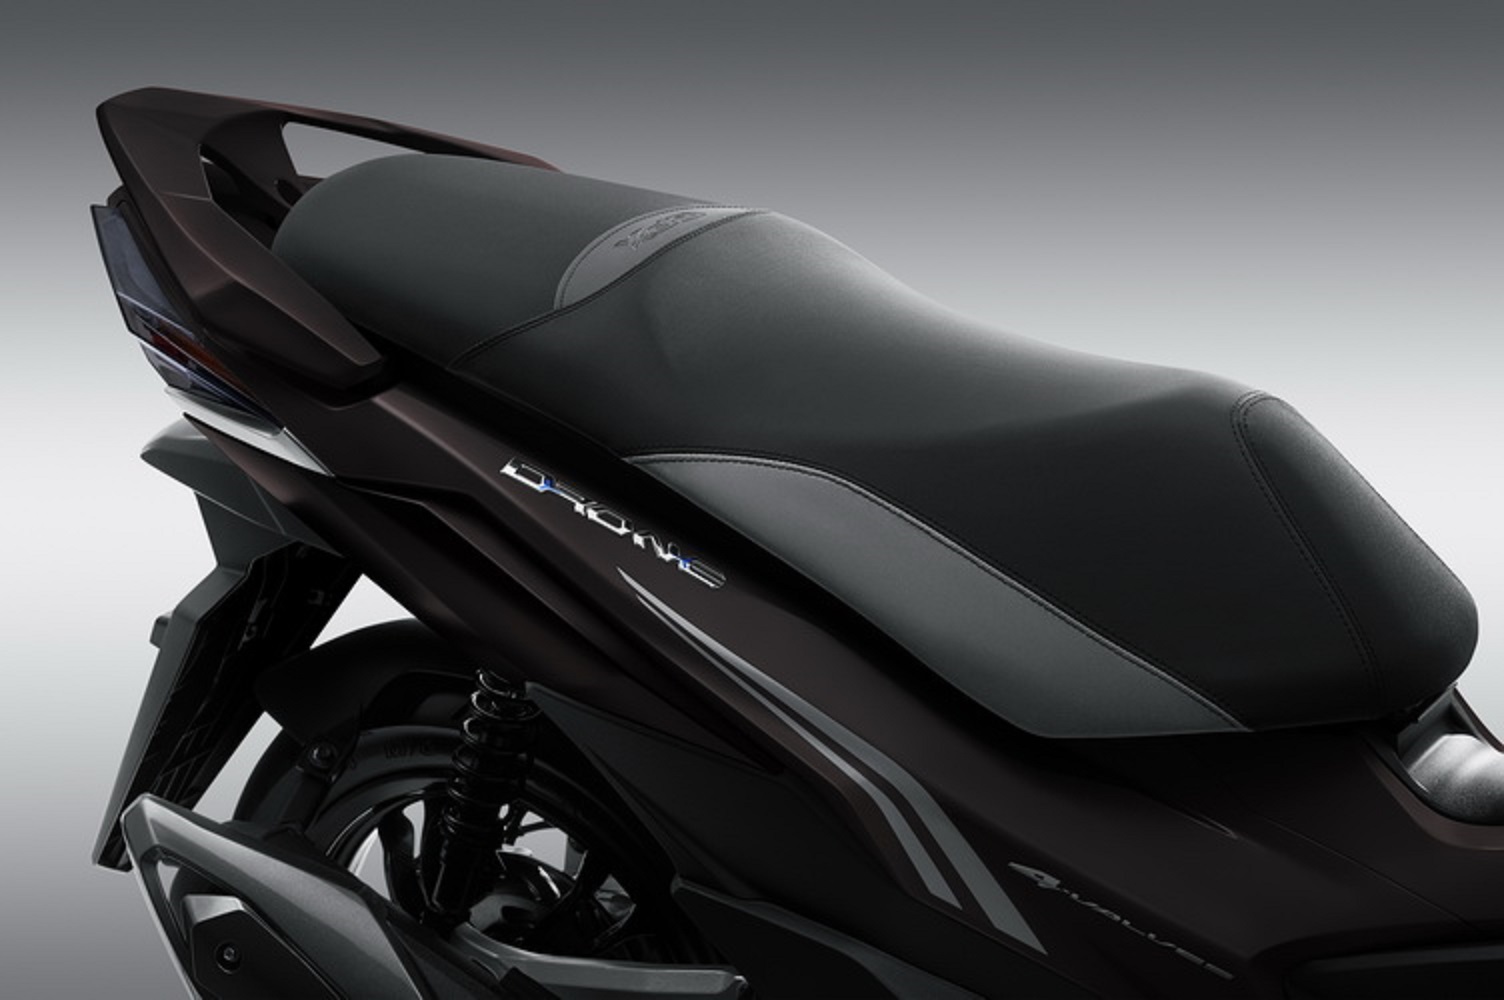 Thai motorcycle model launched with price from 50 million, Honda PCX 160’s ‘nightmare’